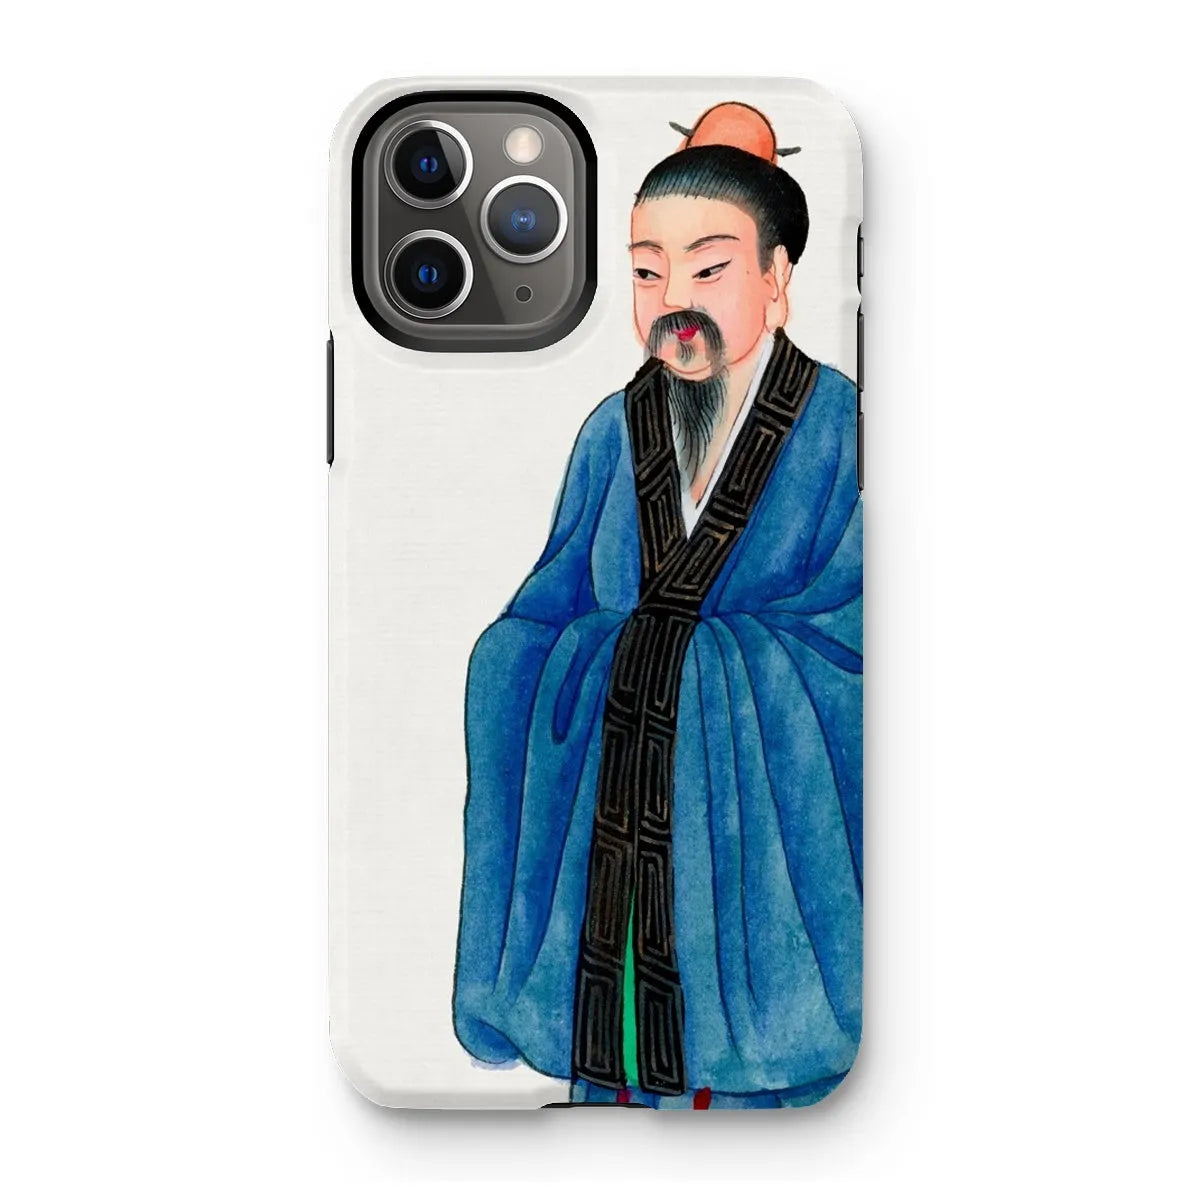 Grand Master - Chinese Buddhist Aesthetic Art Phone Case - Iphone 11 Pro / Matte - Mobile Phone Cases - Aesthetic Art